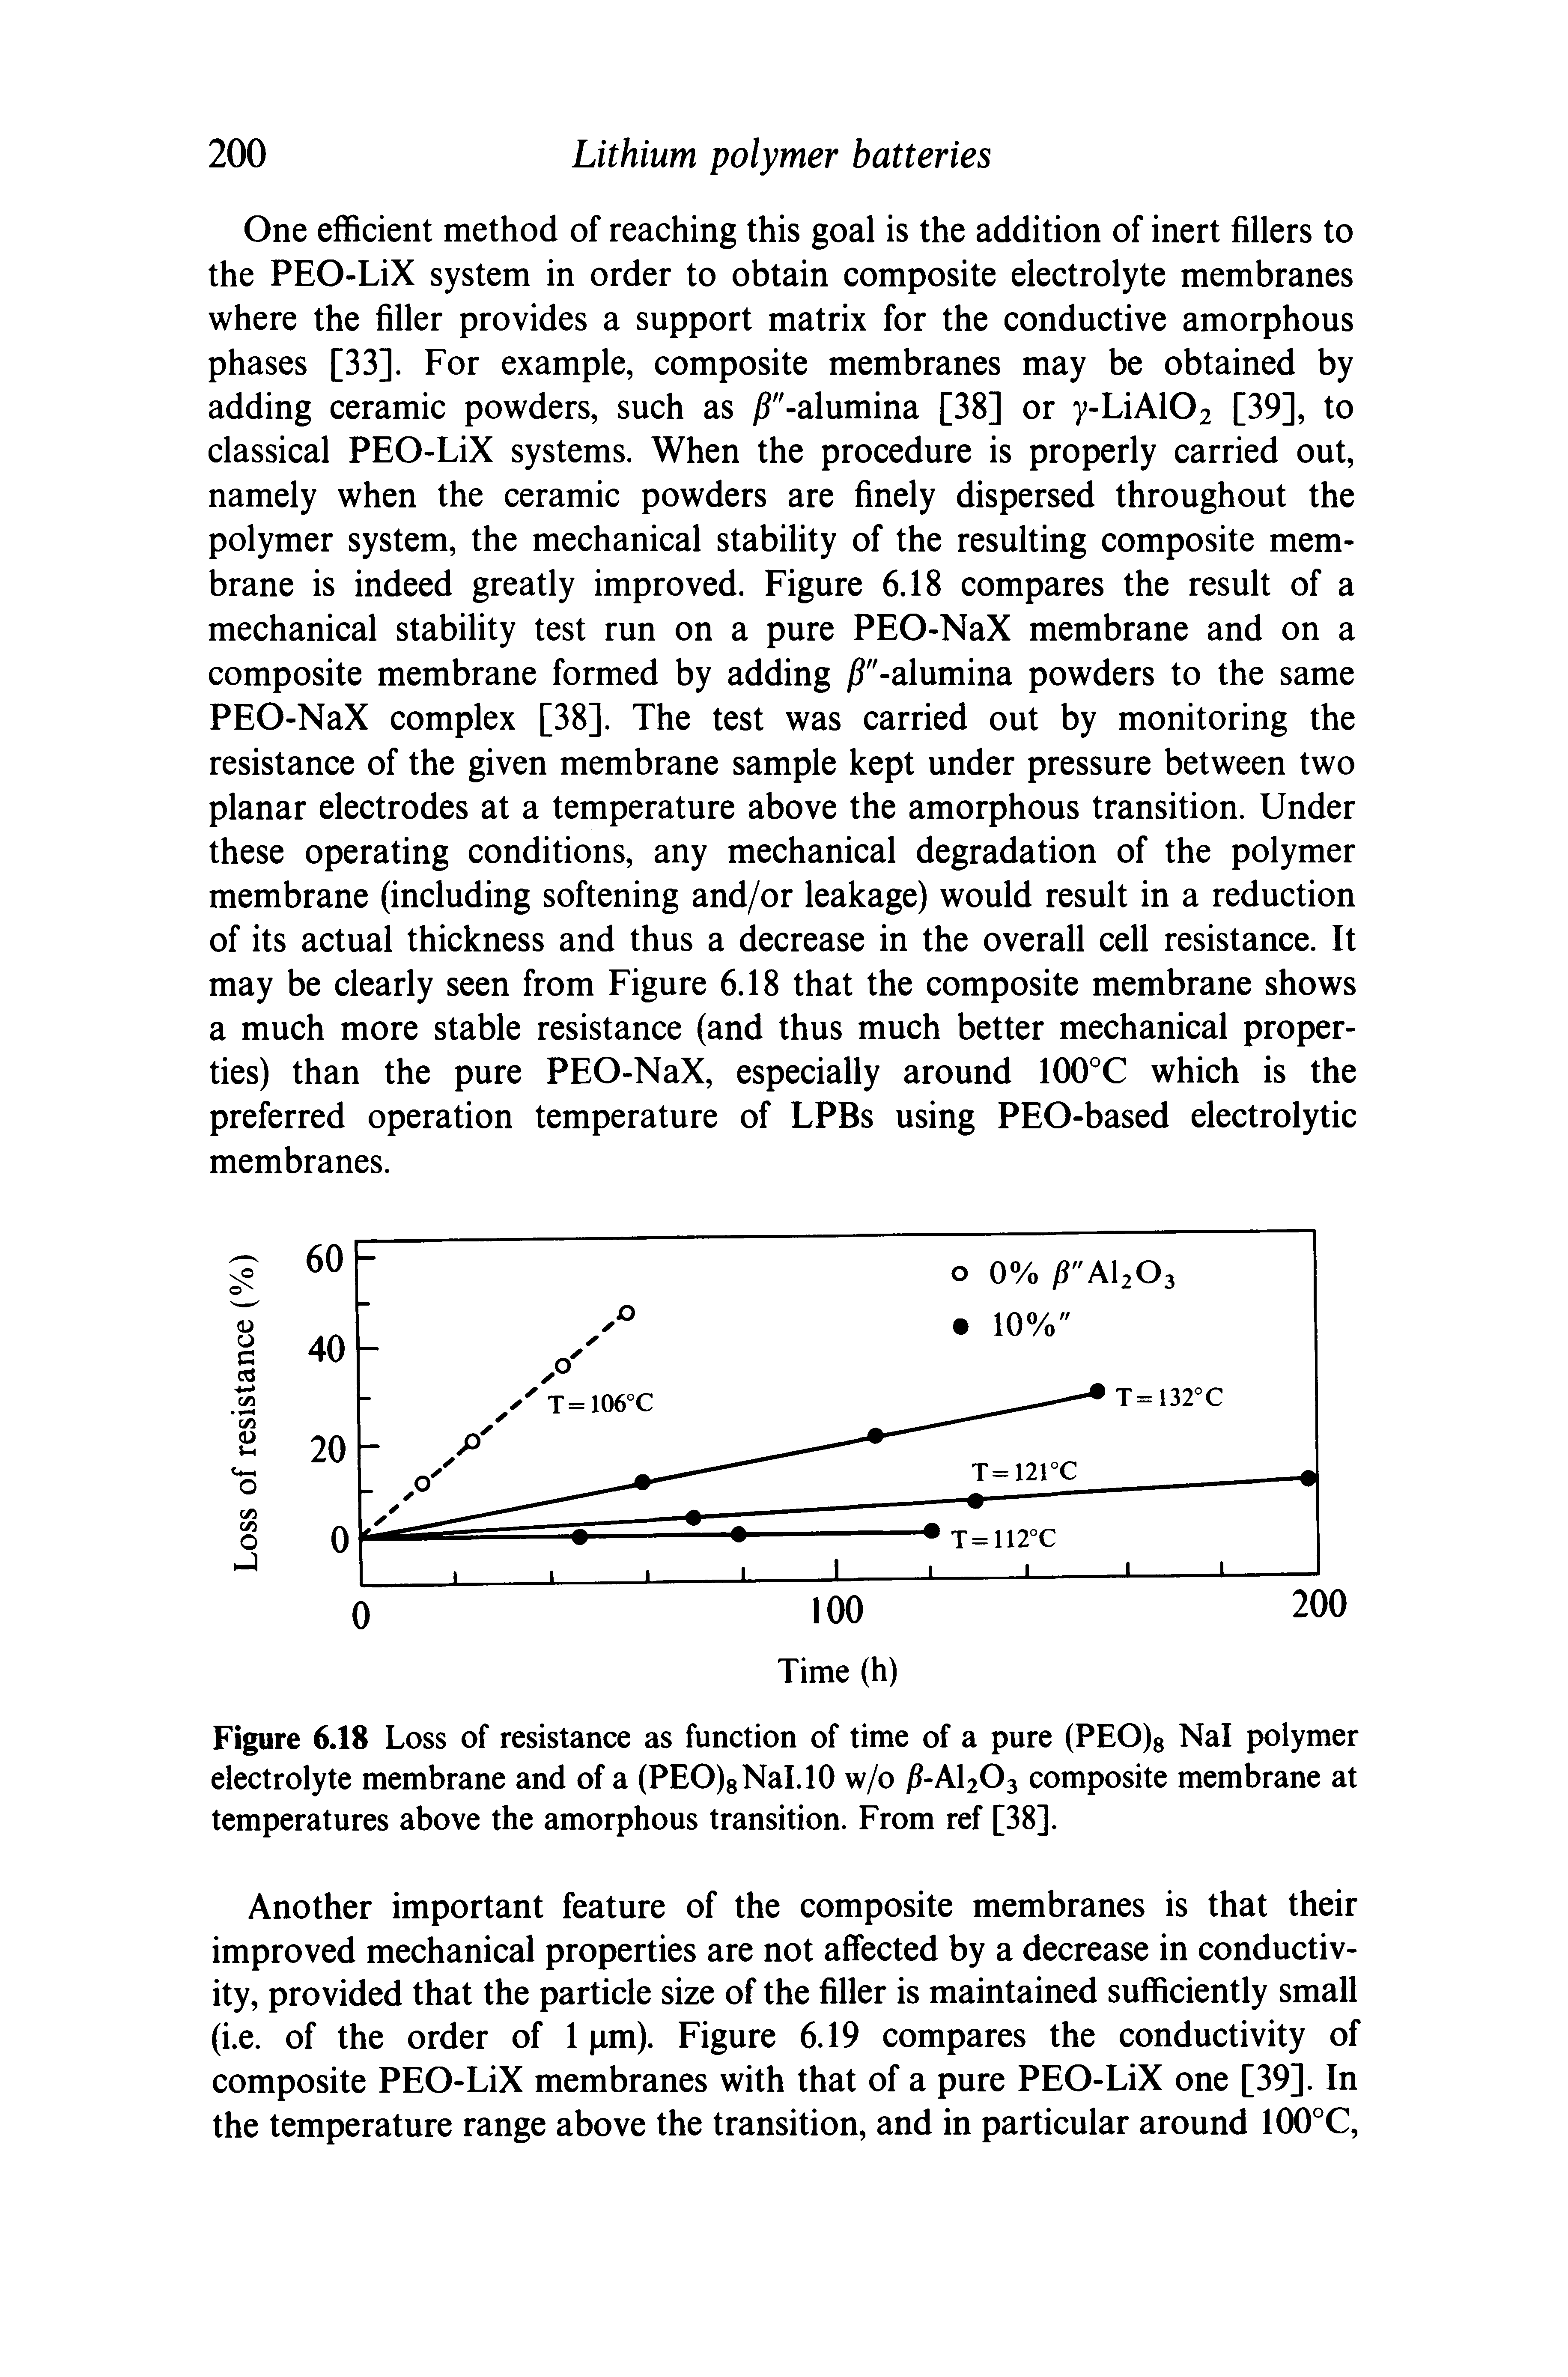 Figure 6.18 Loss of resistance as function of time of a pure (PEO)s Nal polymer electrolyte membrane and of a (PEO)8NaI.10 w/o P-AlxO composite membrane at temperatures above the amorphous transition. From ref [38].